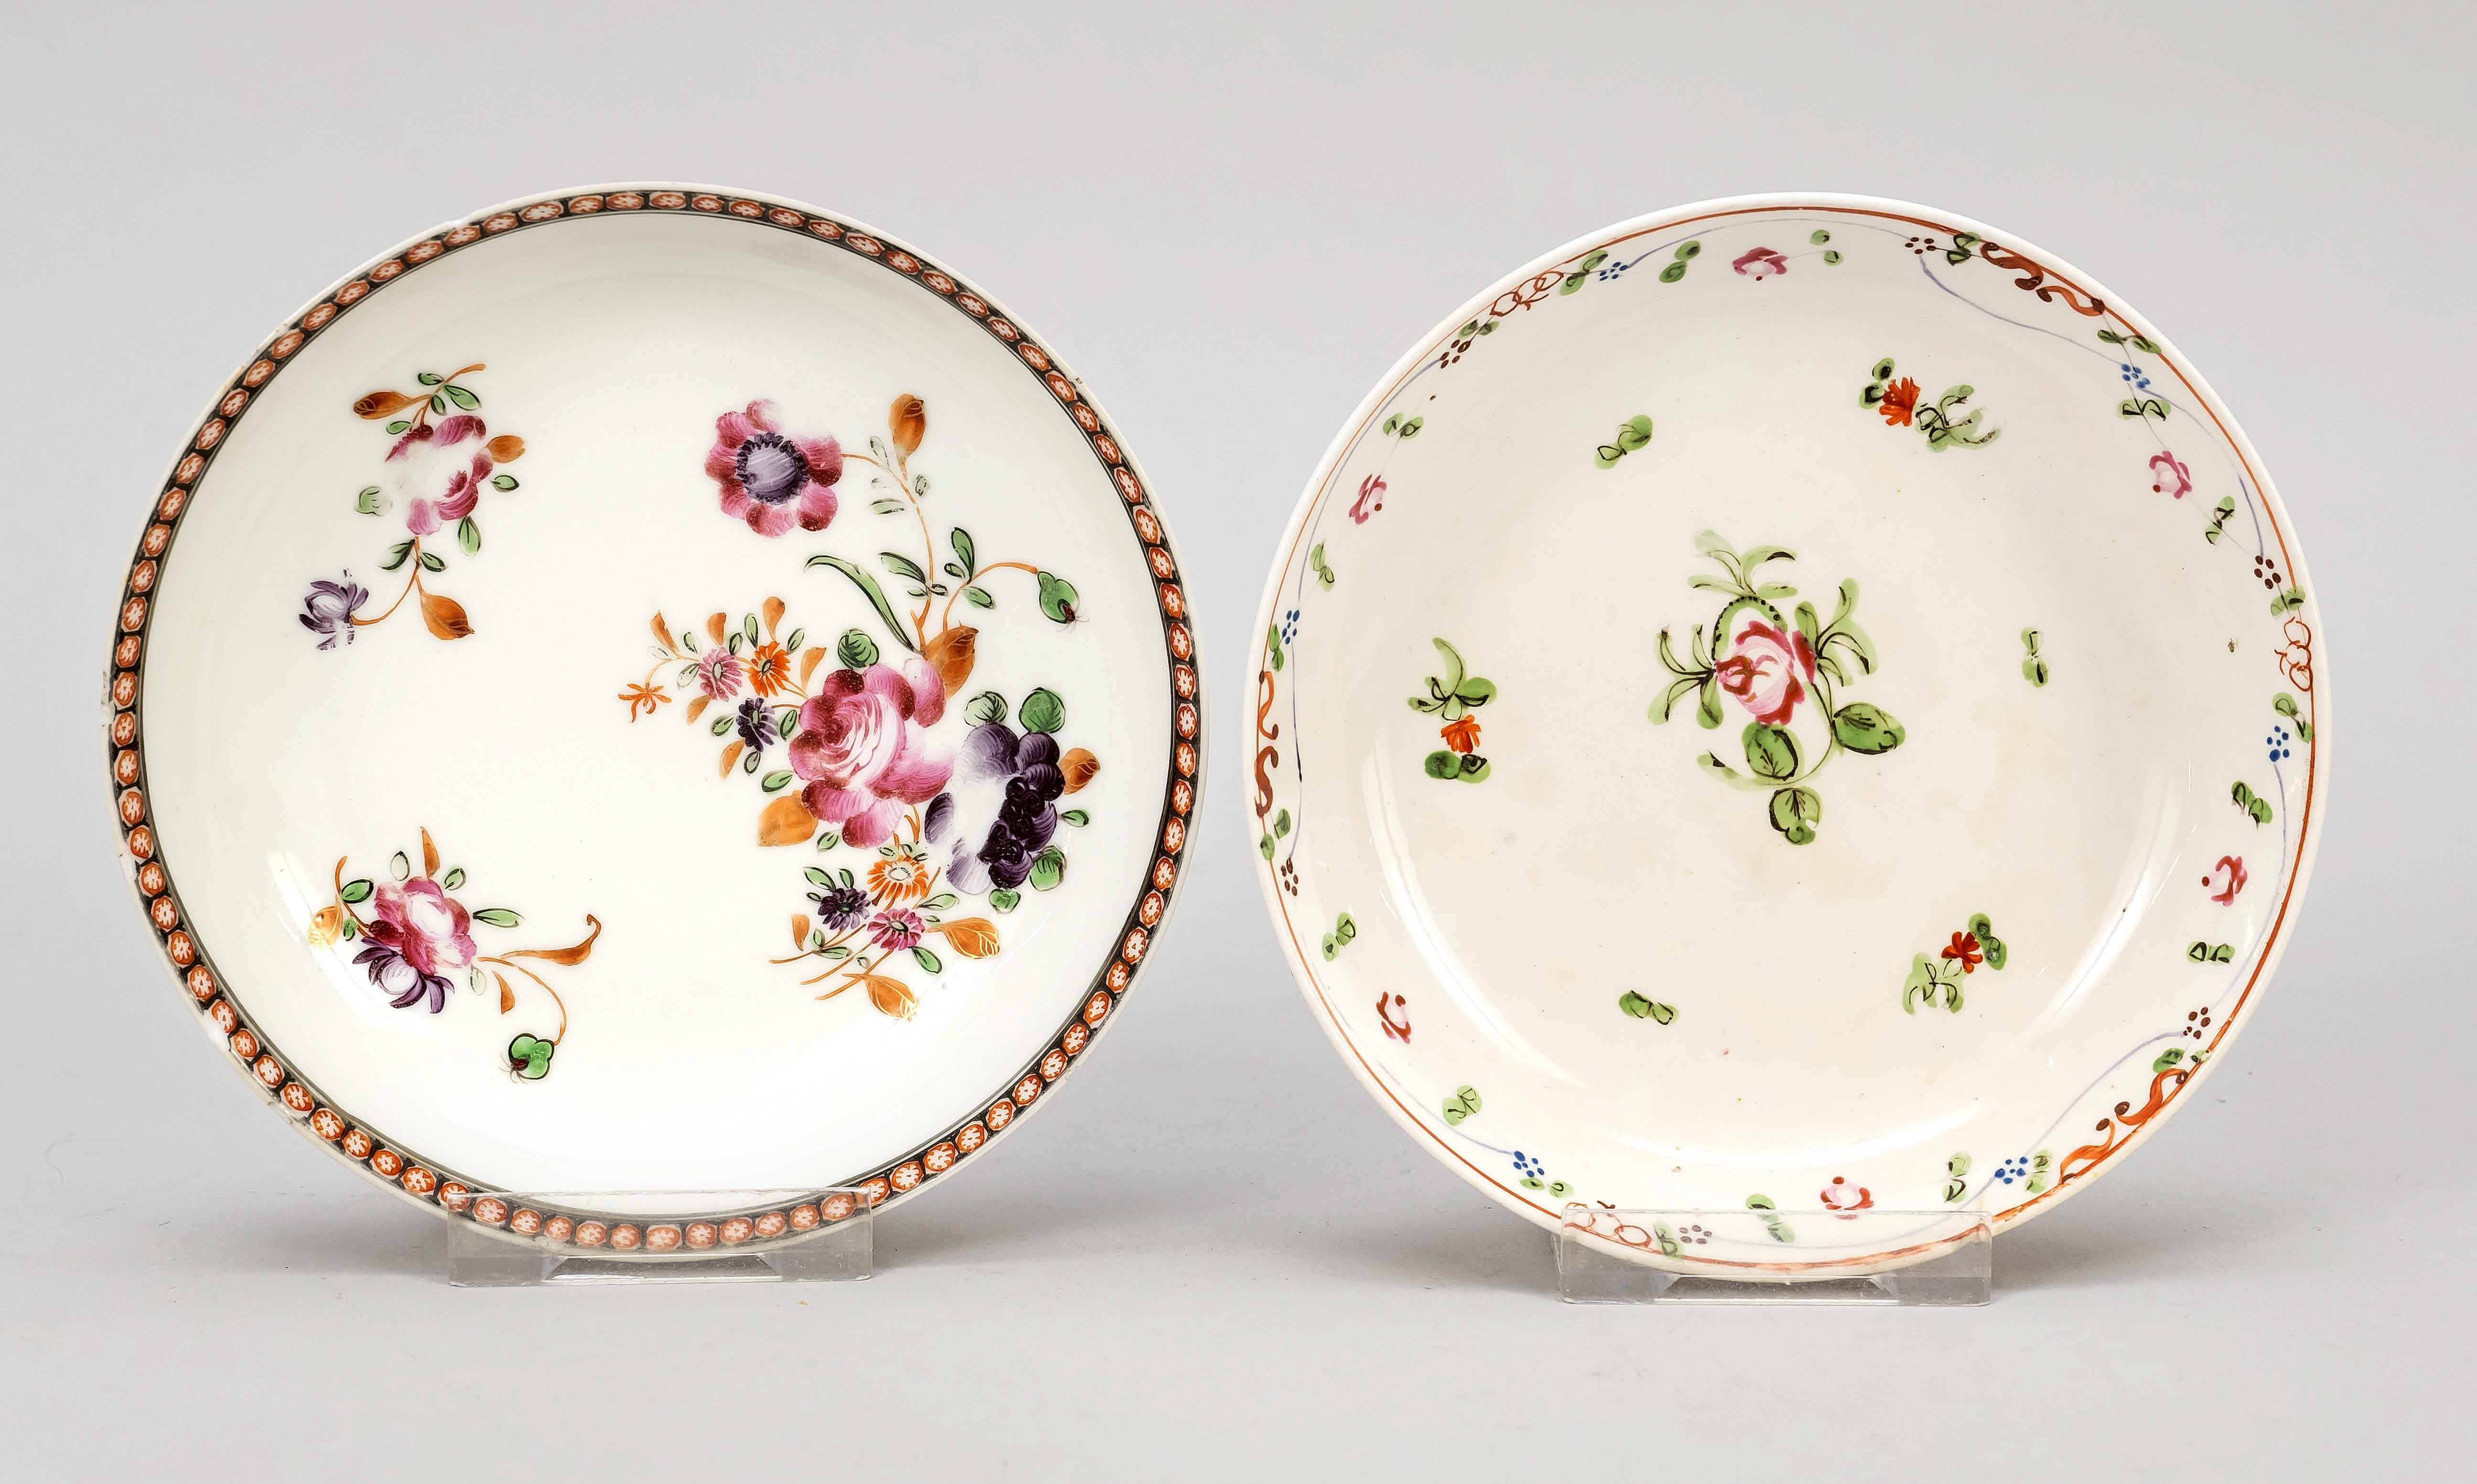 2 small plates Canton, South China, Prov. Guangzhou, Canton, Qing dynasty(1644-1912), 18th